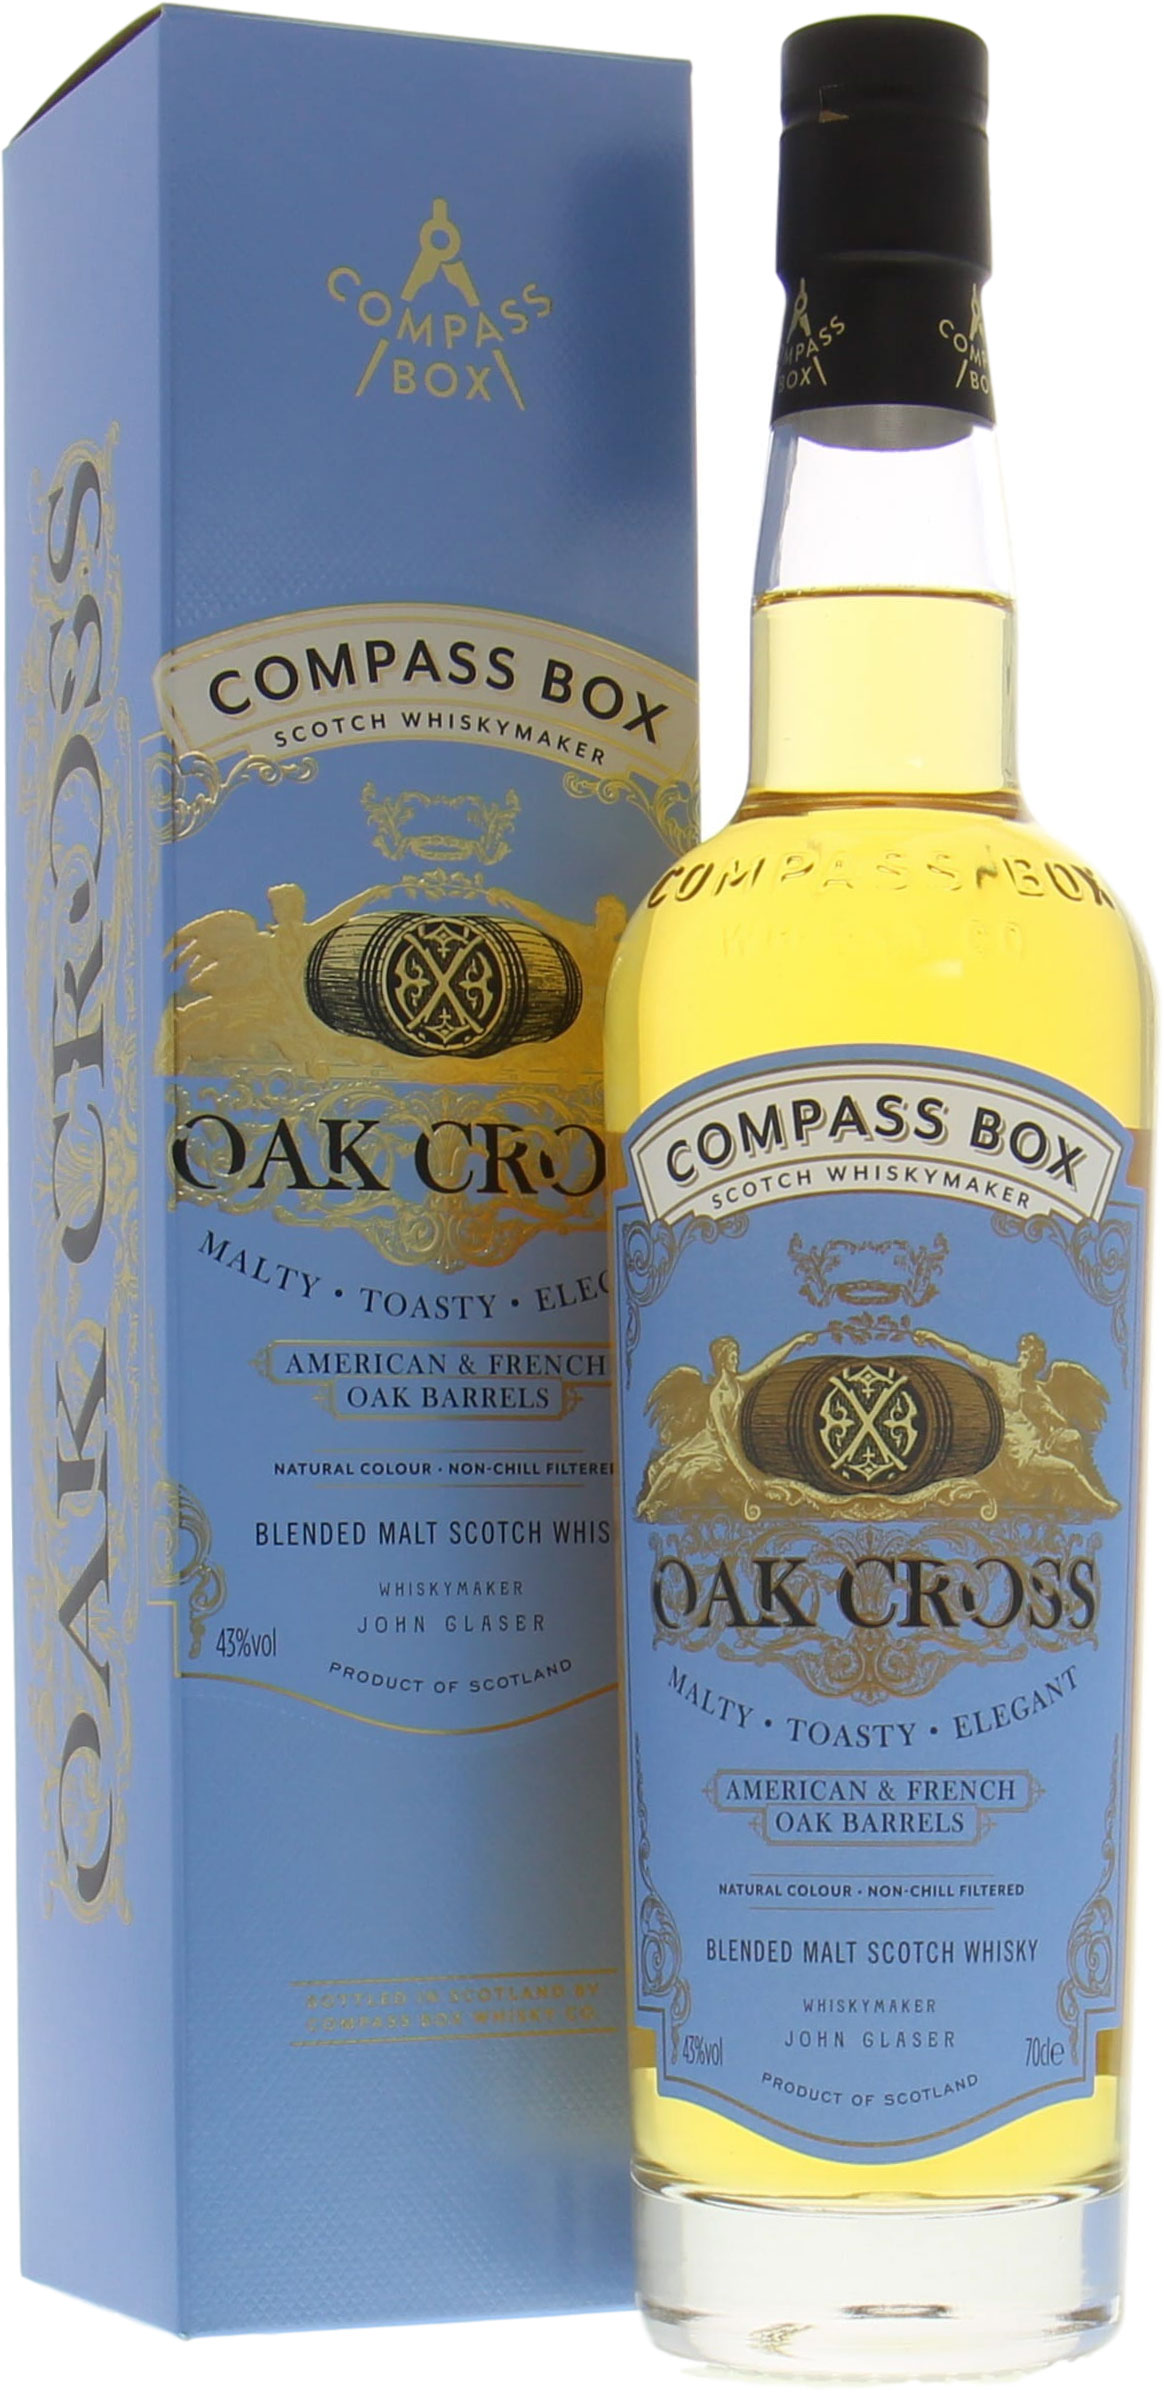 Compass Box - Oak Cross The Signature Range 10 Years Old 43% NV In Original Container